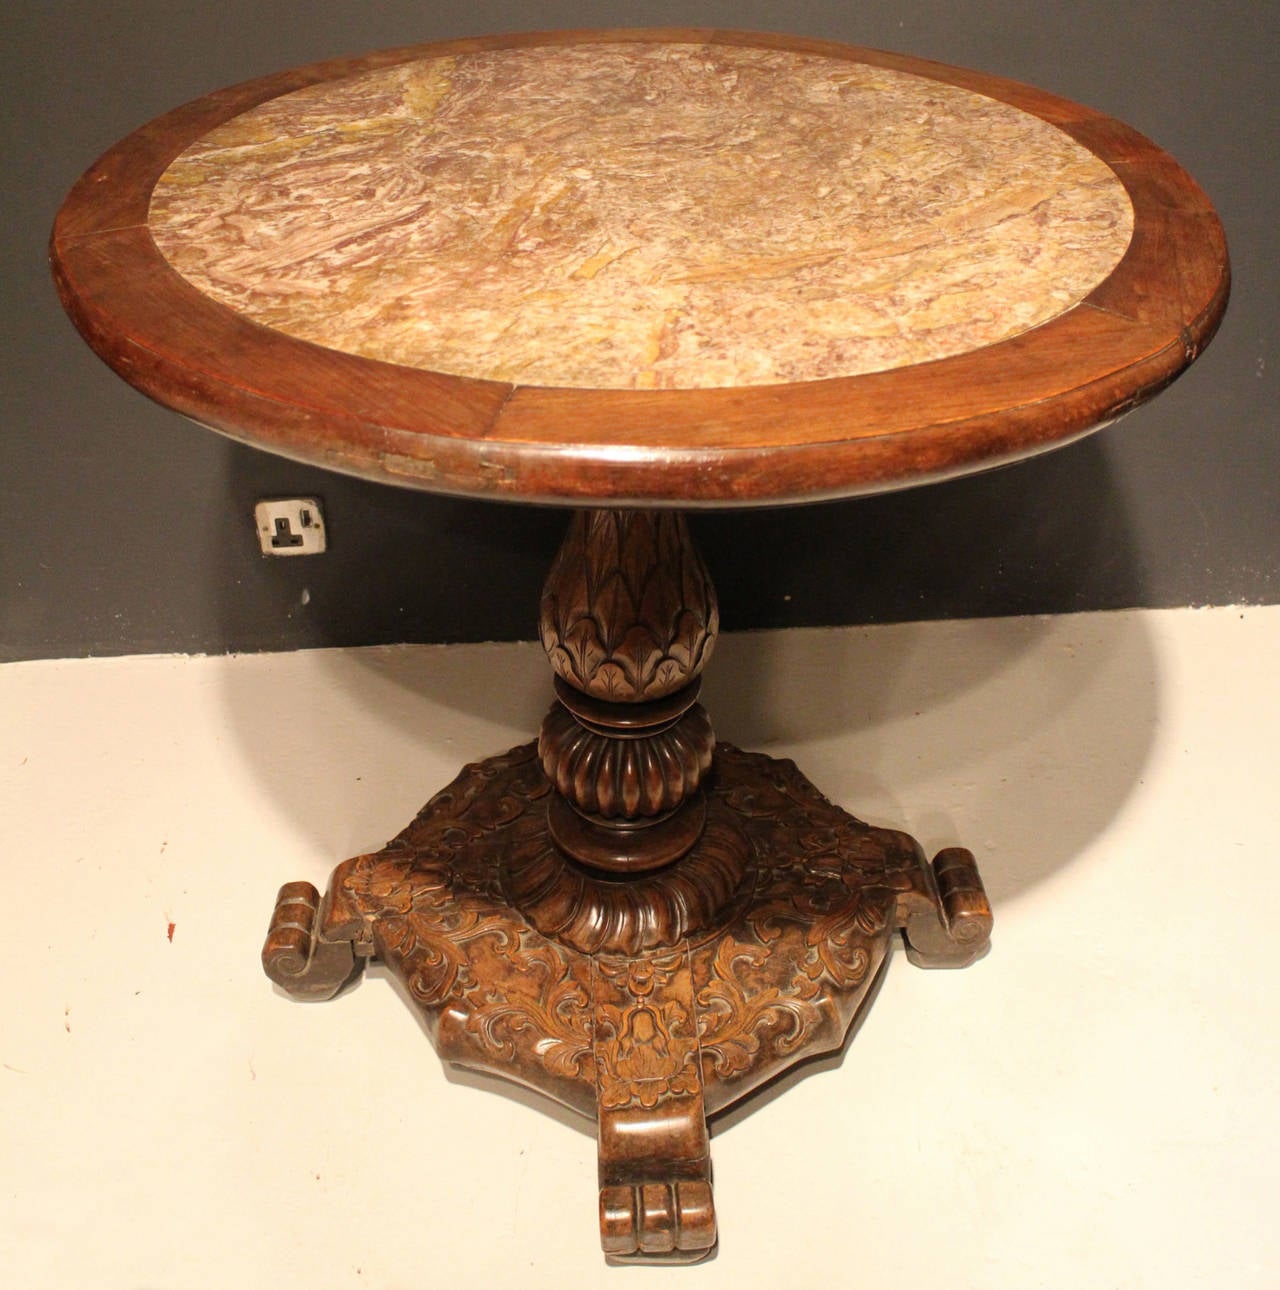 A medium sized Chinese marble-topped table on a carved wooden base.

